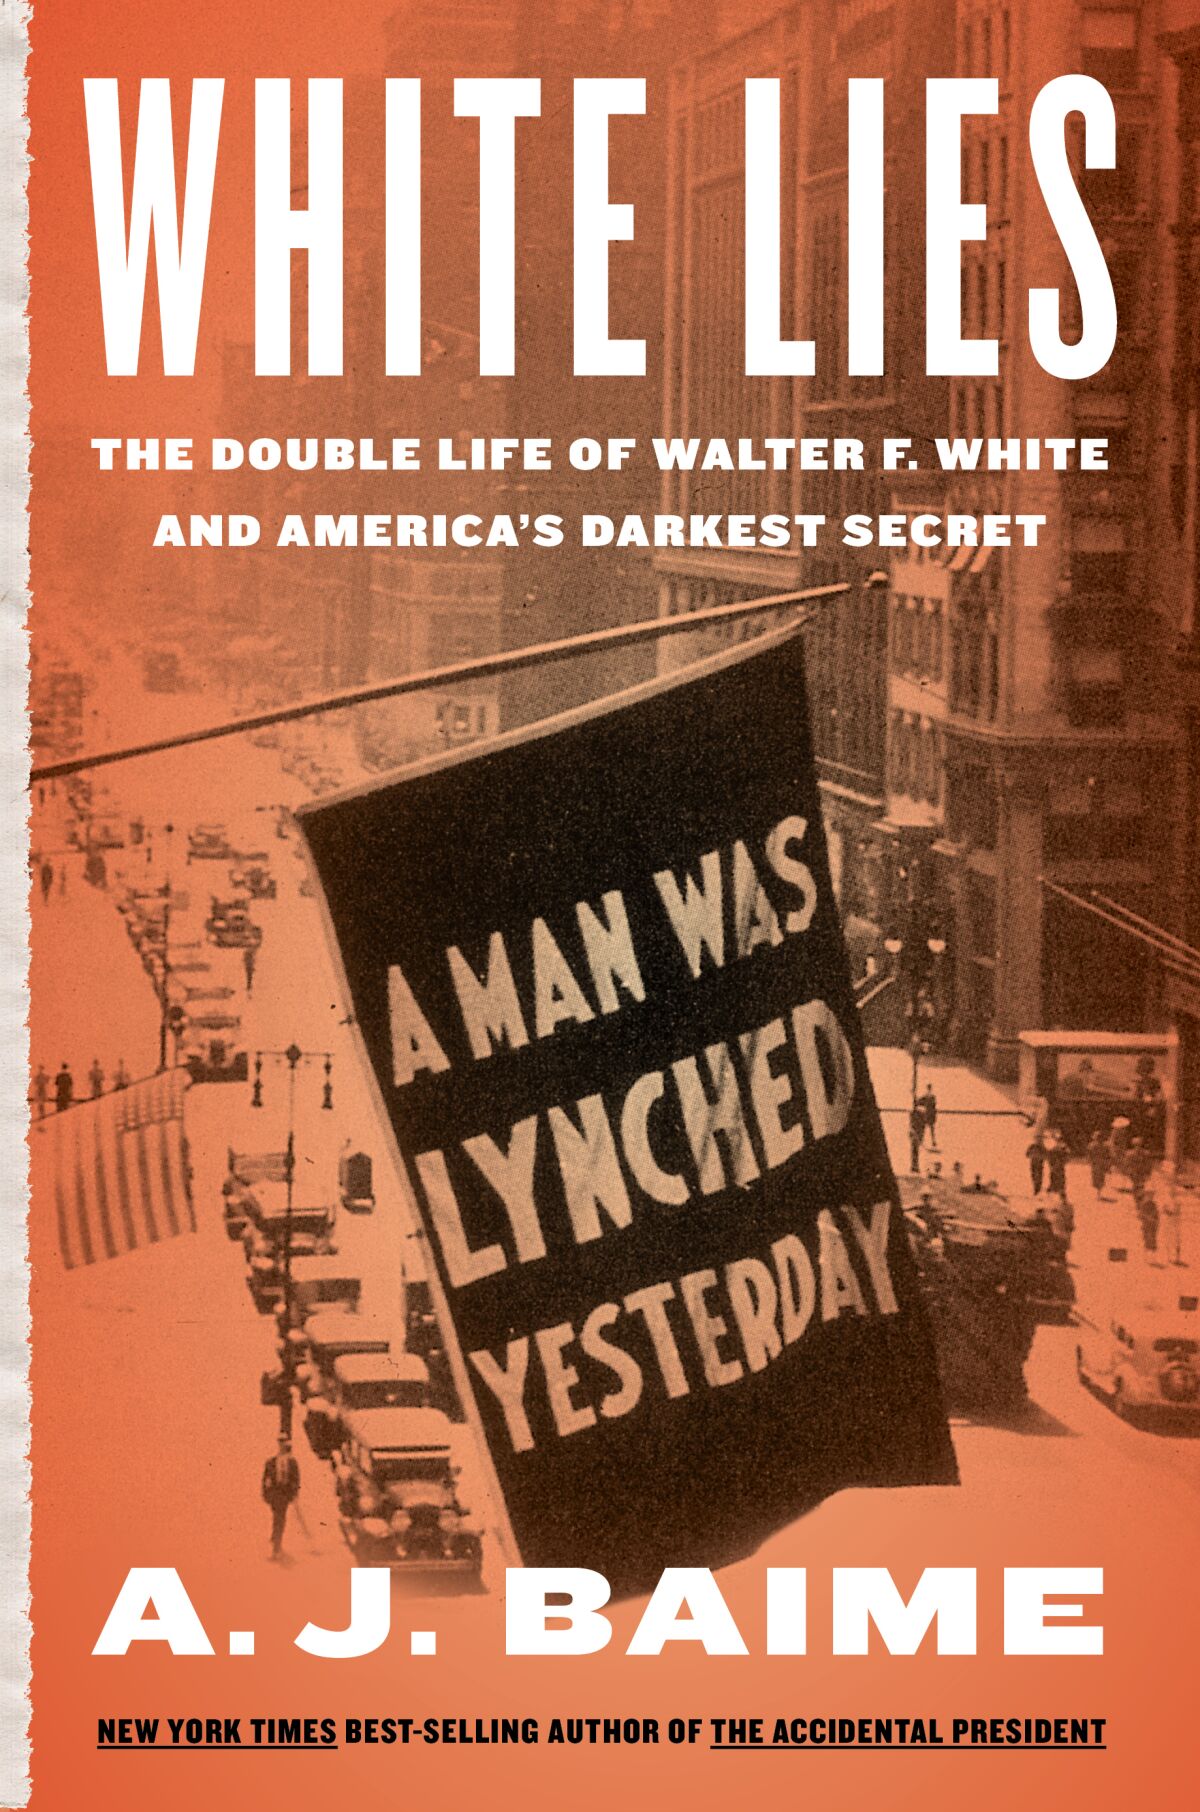 Cover of the book "White Lies: The Double Life of Walter F. White and America's Darkest Secret" 